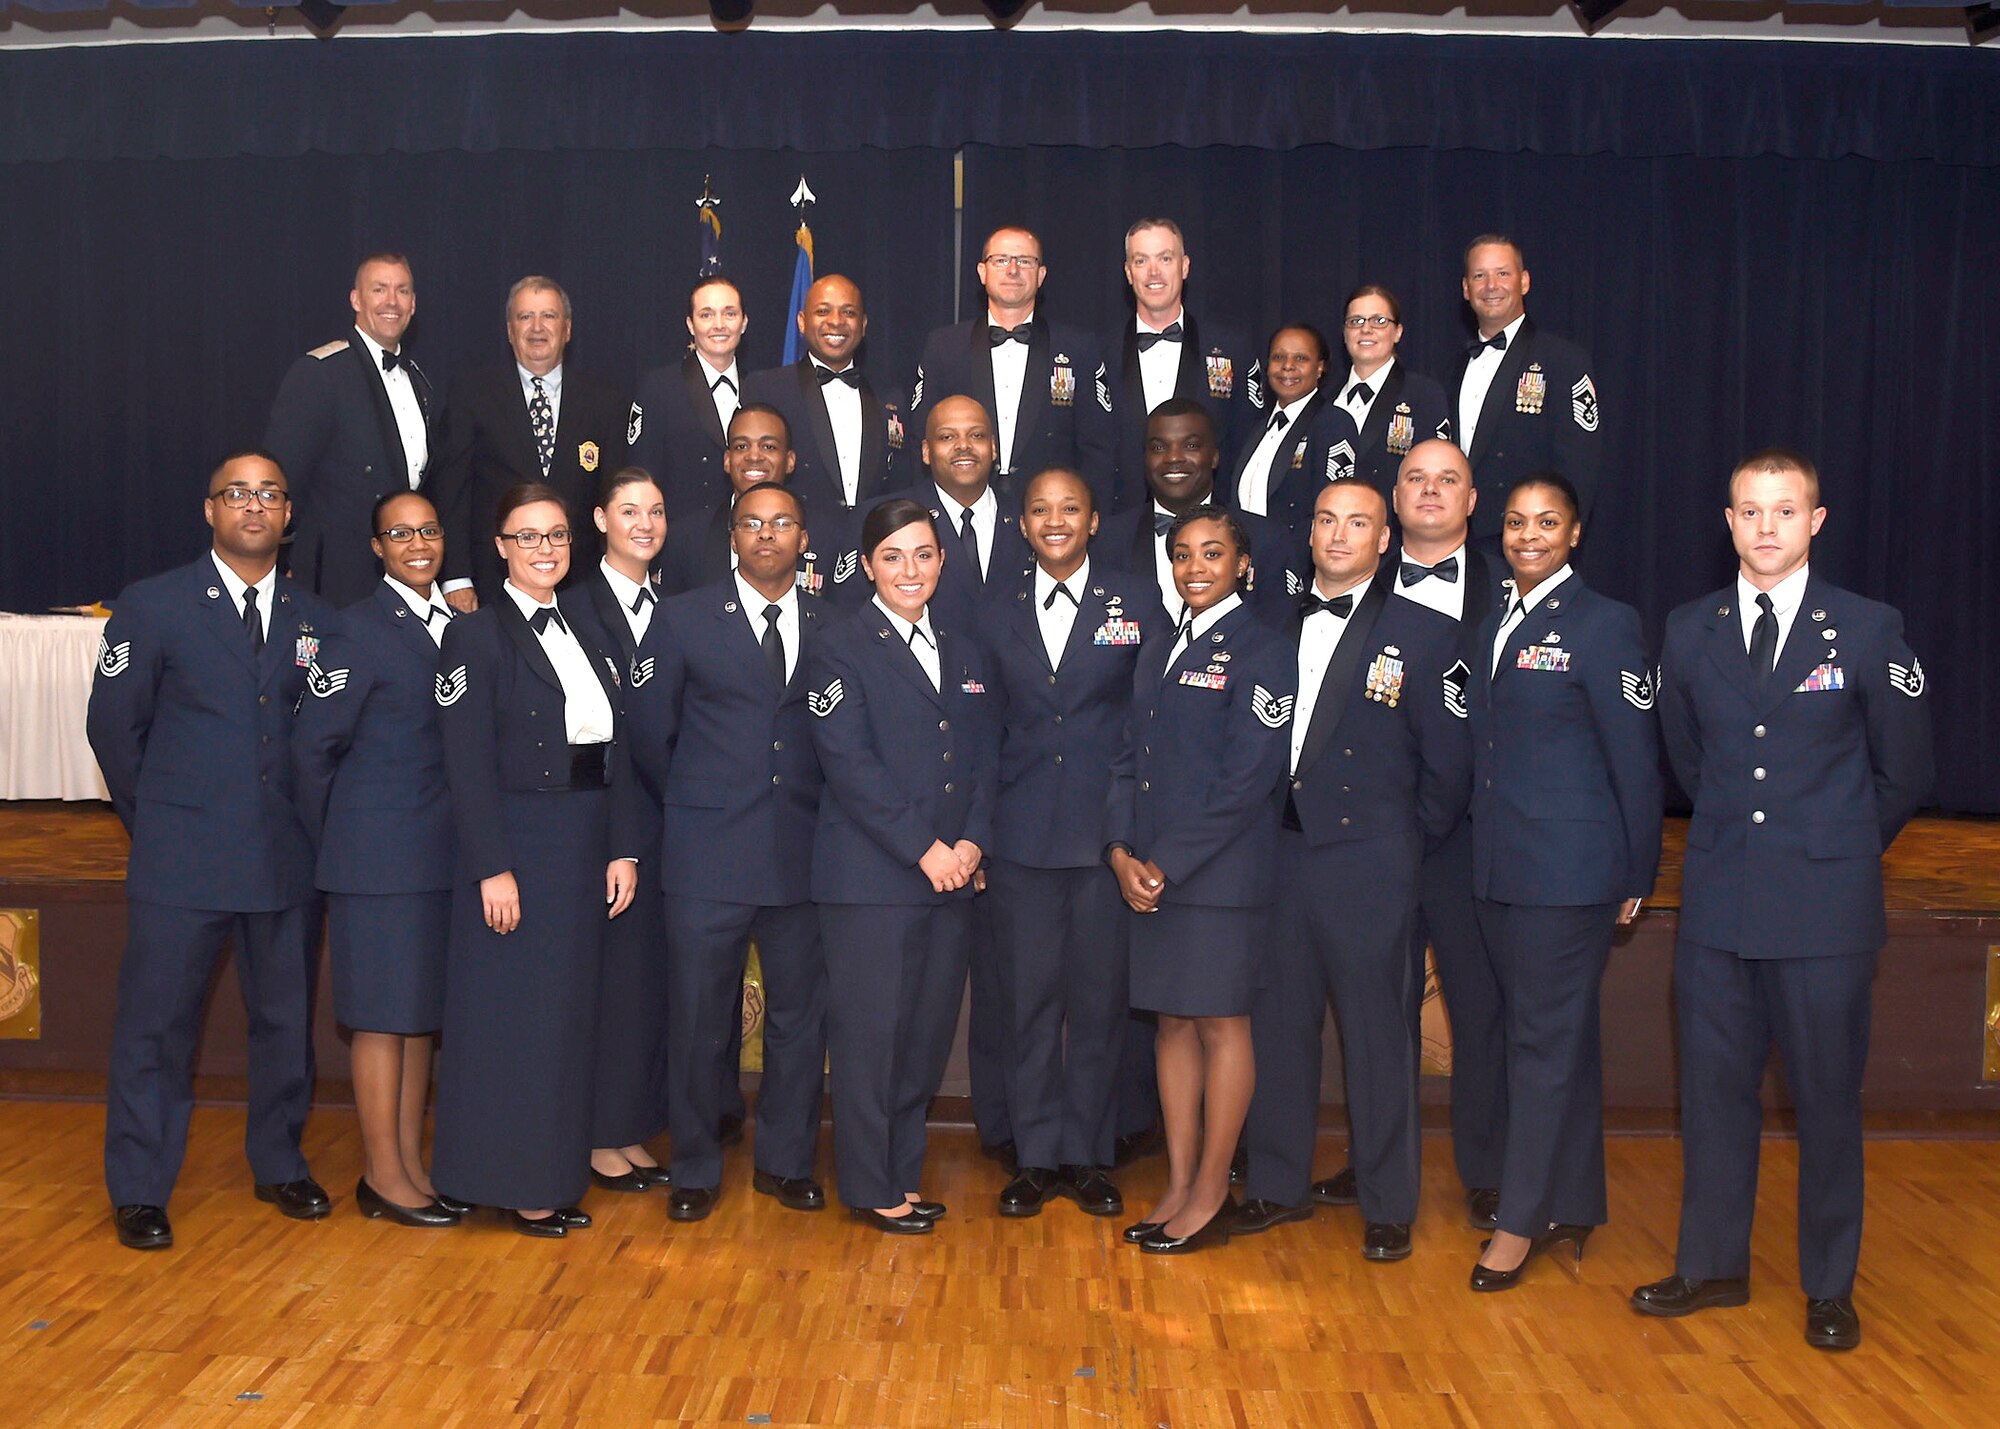 Graduates and instructors of the Airpower Leadership Academy Class 17-A pause for a group photo during graduation June 21, 2017 at Luke Air Force Base, Ariz. ALA is a 20-week program for technical and staff sergeants focused on leadership development through: relationships, expectations, academics, character and health. (U.S. Air Force photo by Senior Airman Devante Williams)  